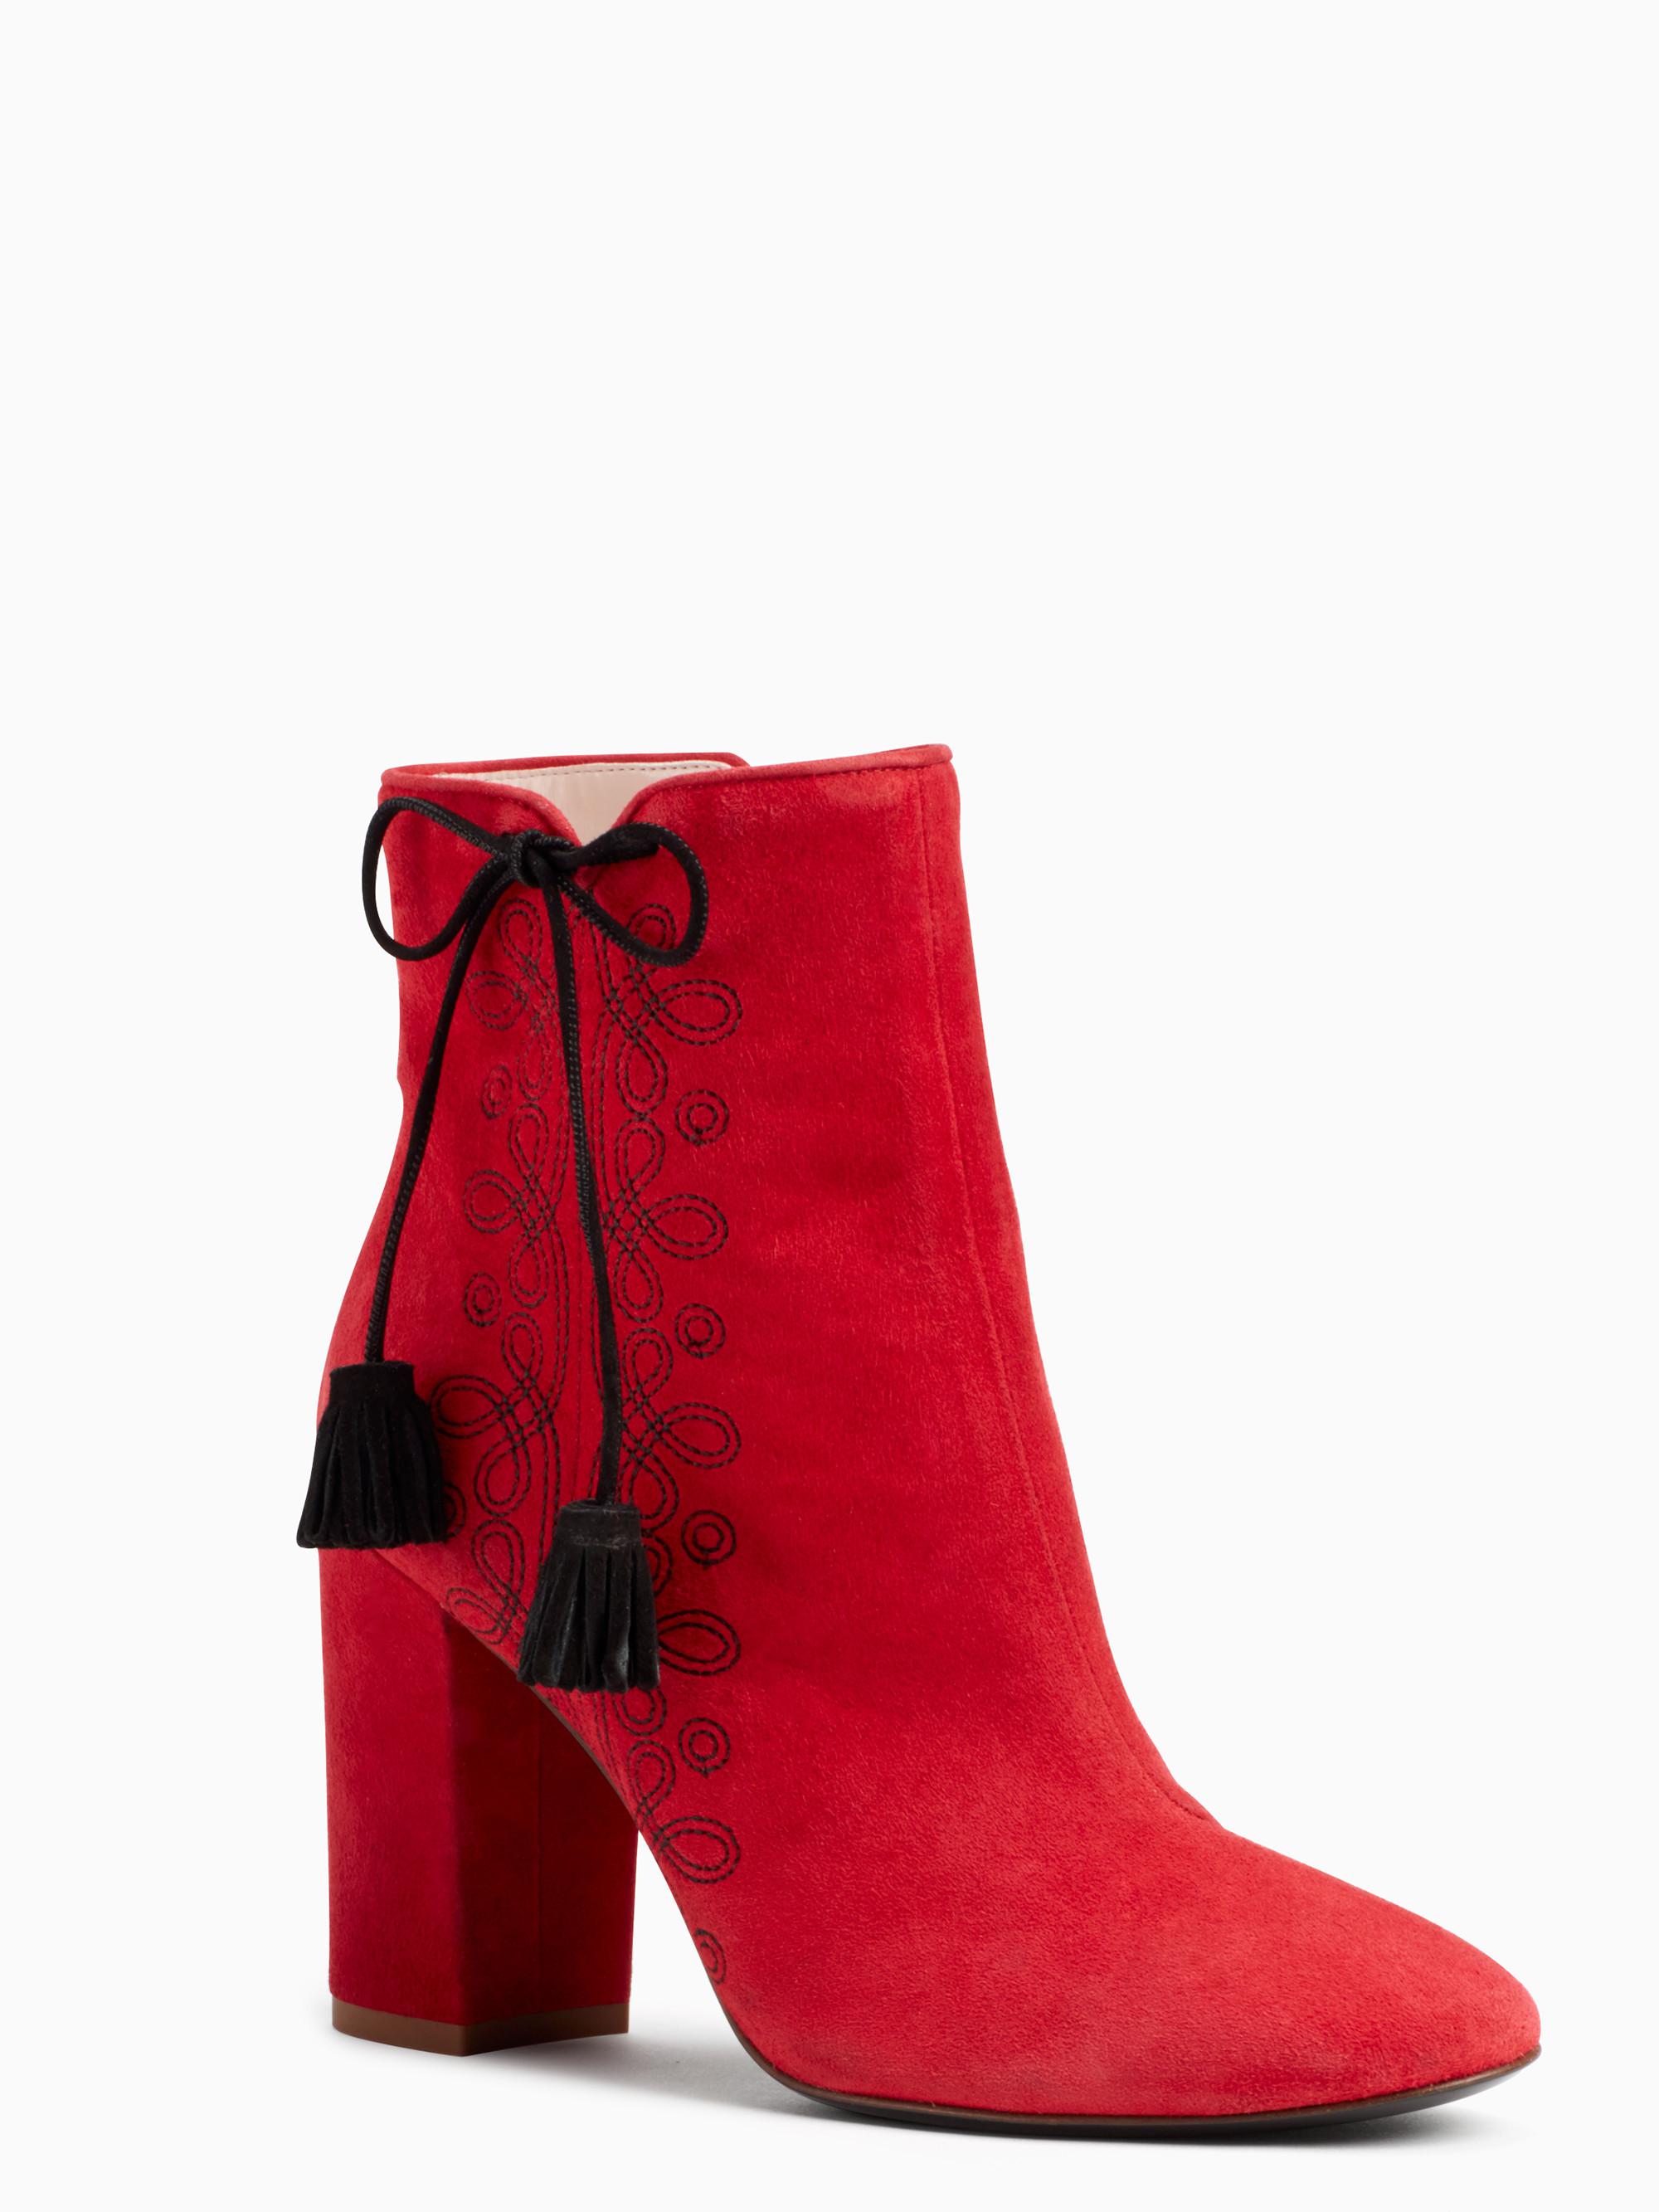 Kate Spade Suede Georgette Boots in Red 